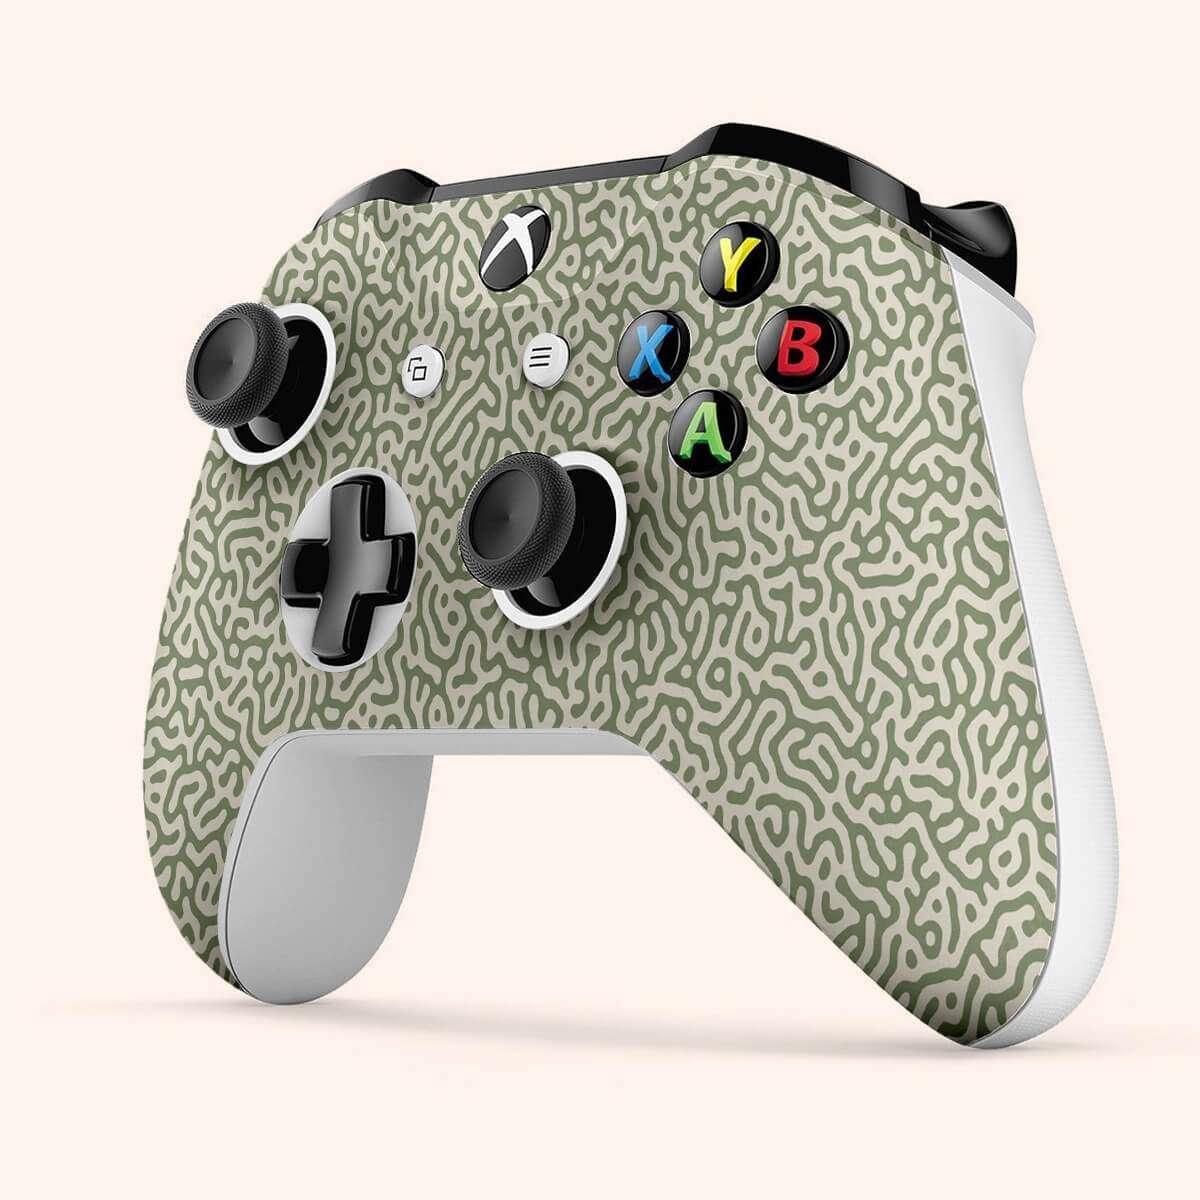 Personalised Xbox One X S Controller Skin Wrappz